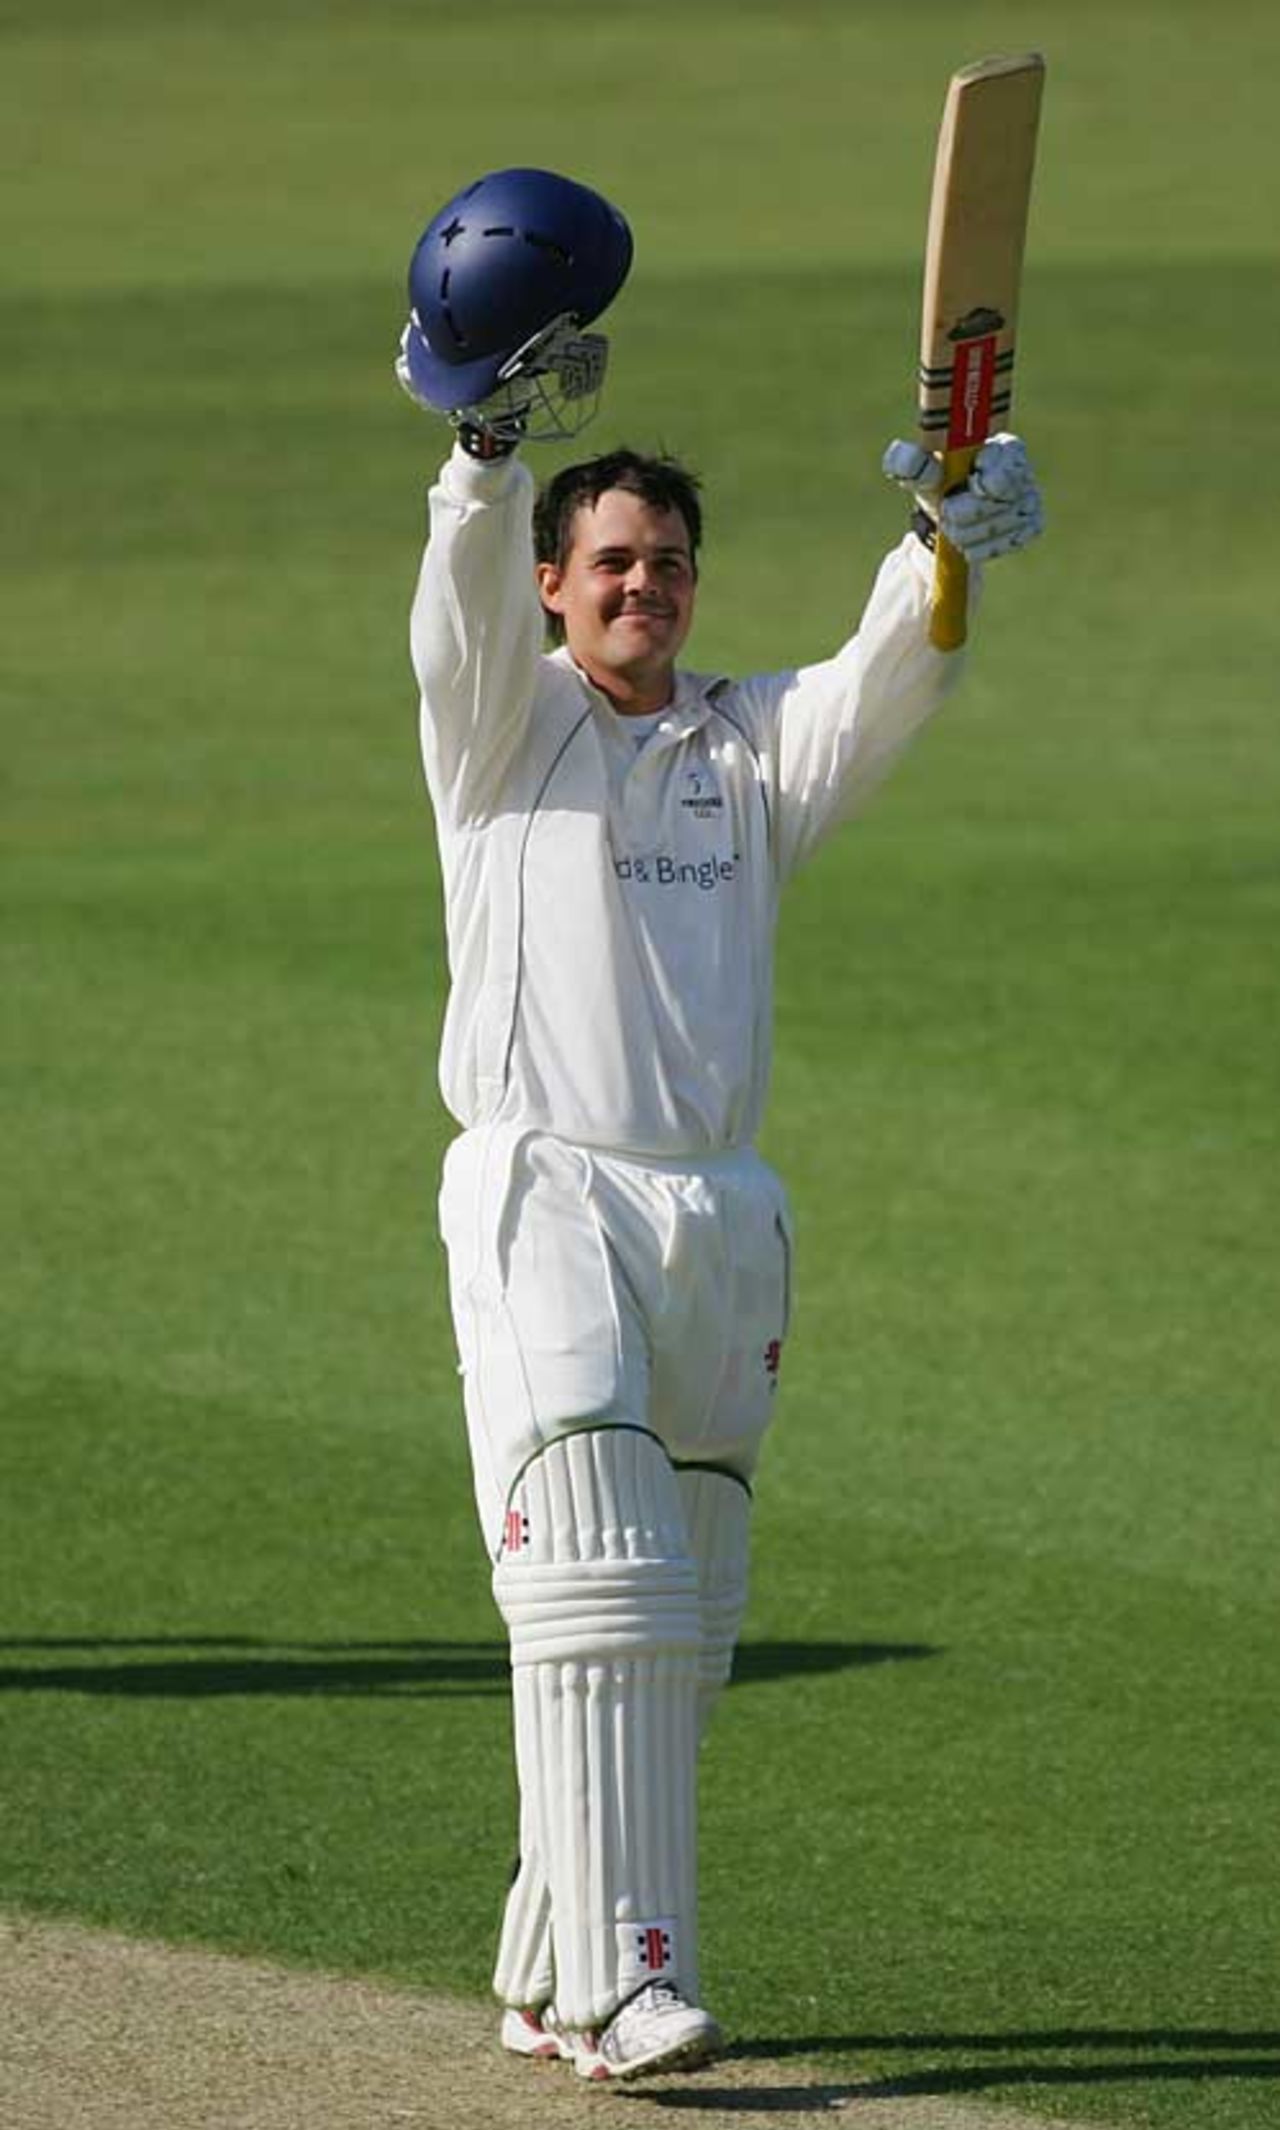 Jacques Rudolph salutes his new team-mates after reaching three figures, Surrey v Yorkshire, County Championship, Division One, The Oval, April 18, 2007